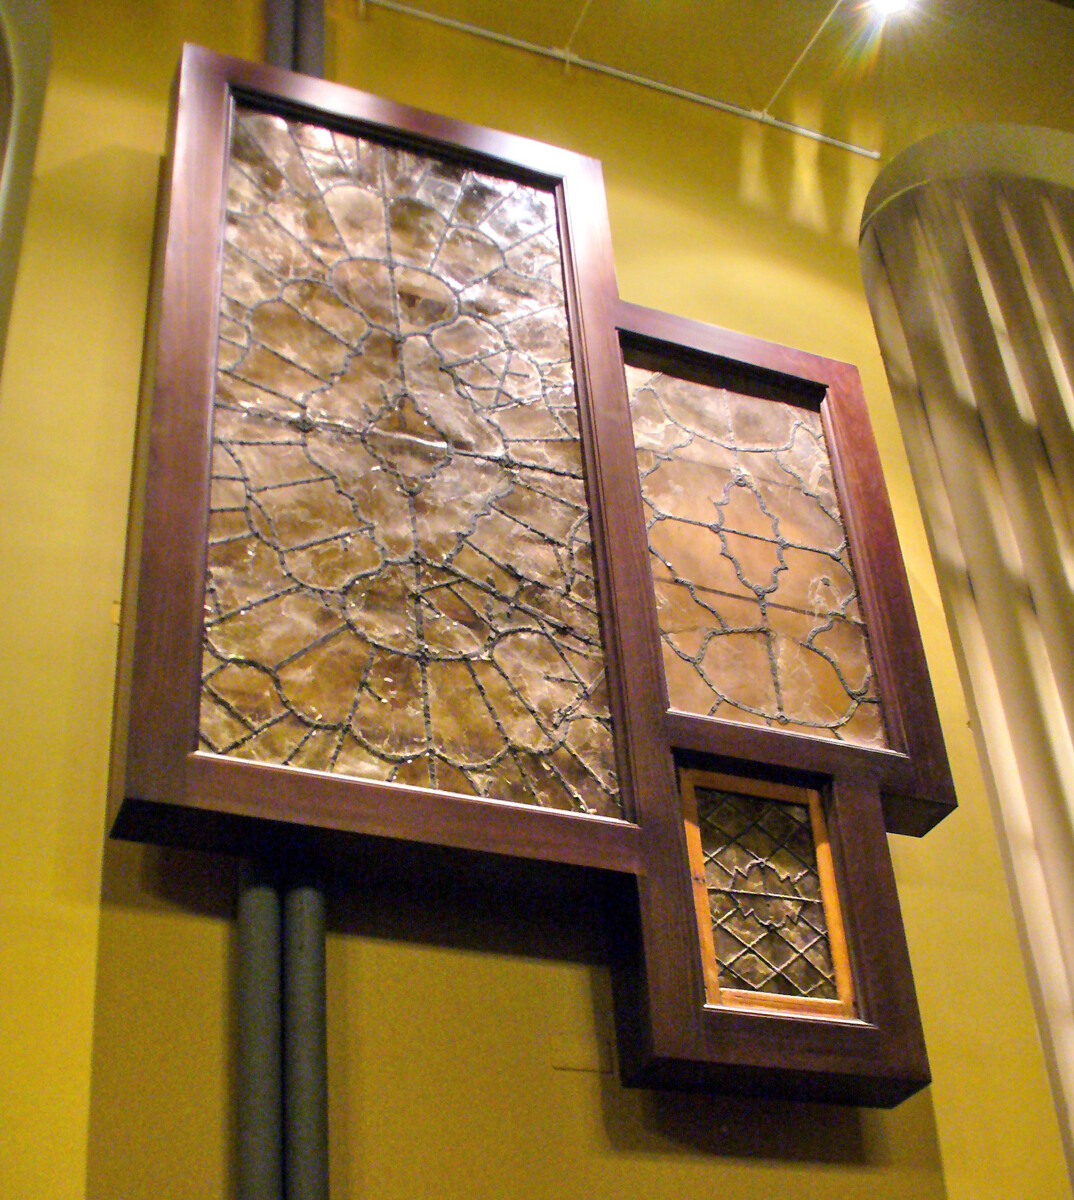 A window made of mica